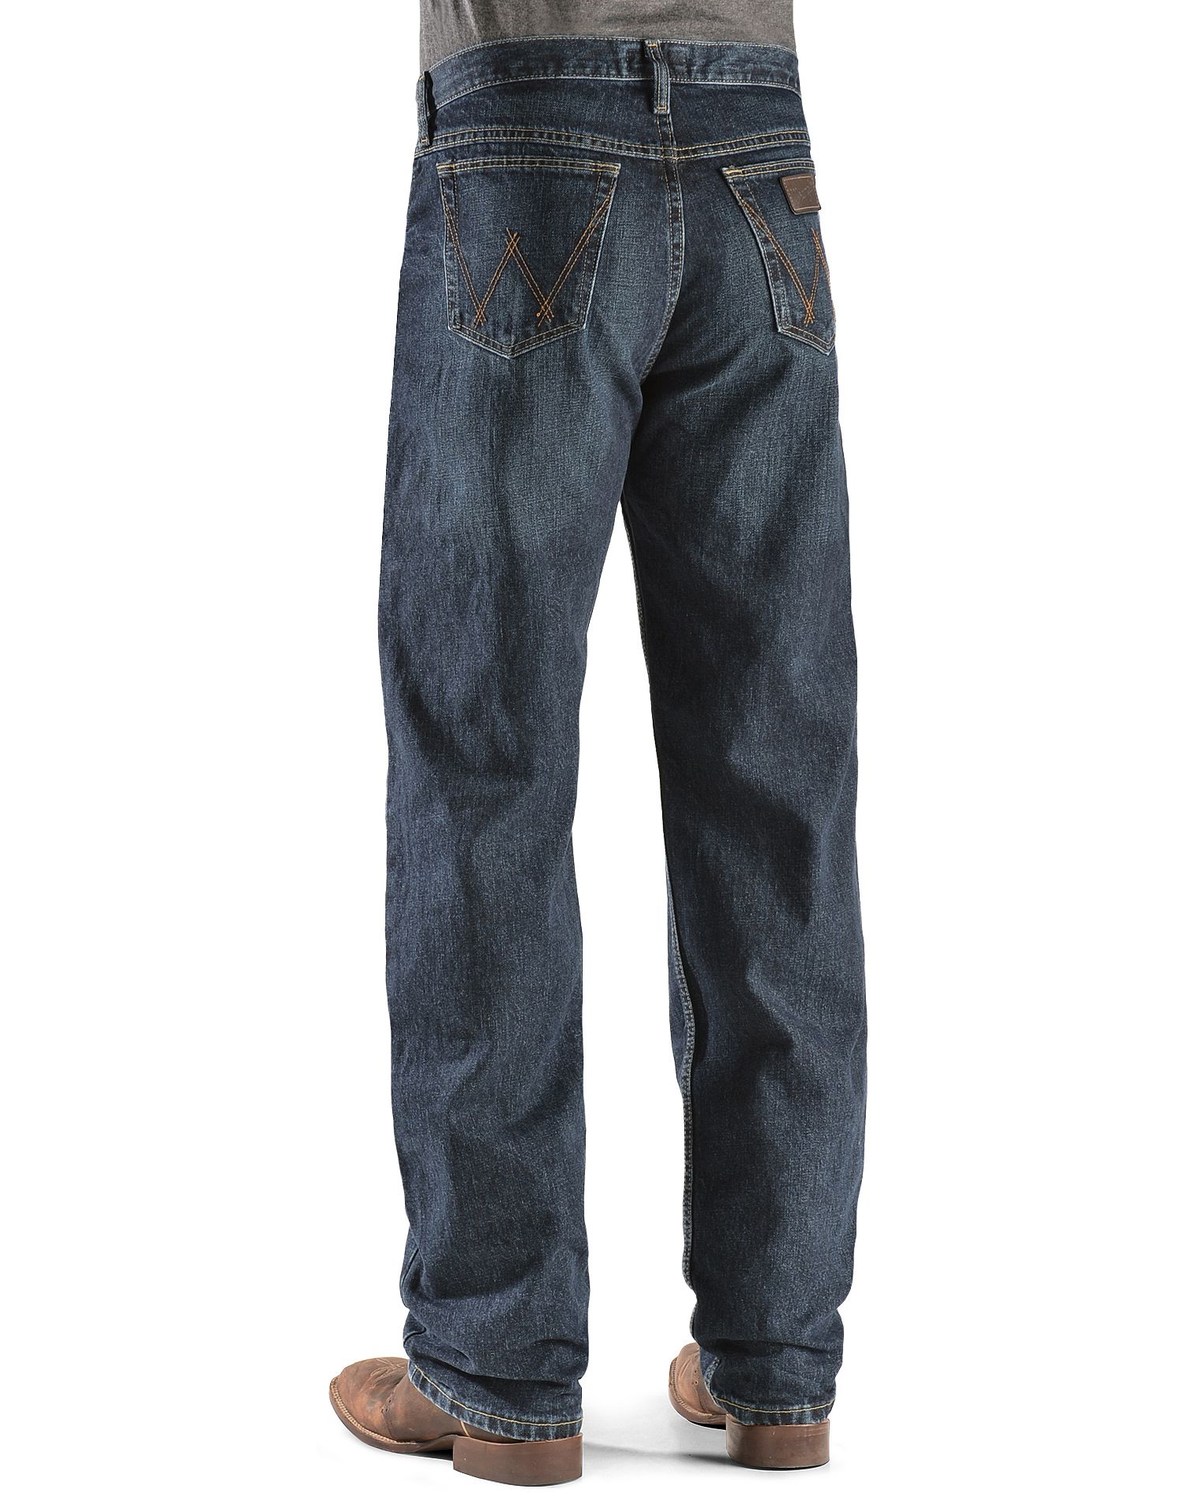 Wrangler 20X Deep Blue Jeans - Competition Relaxed Fit | Boot Barn